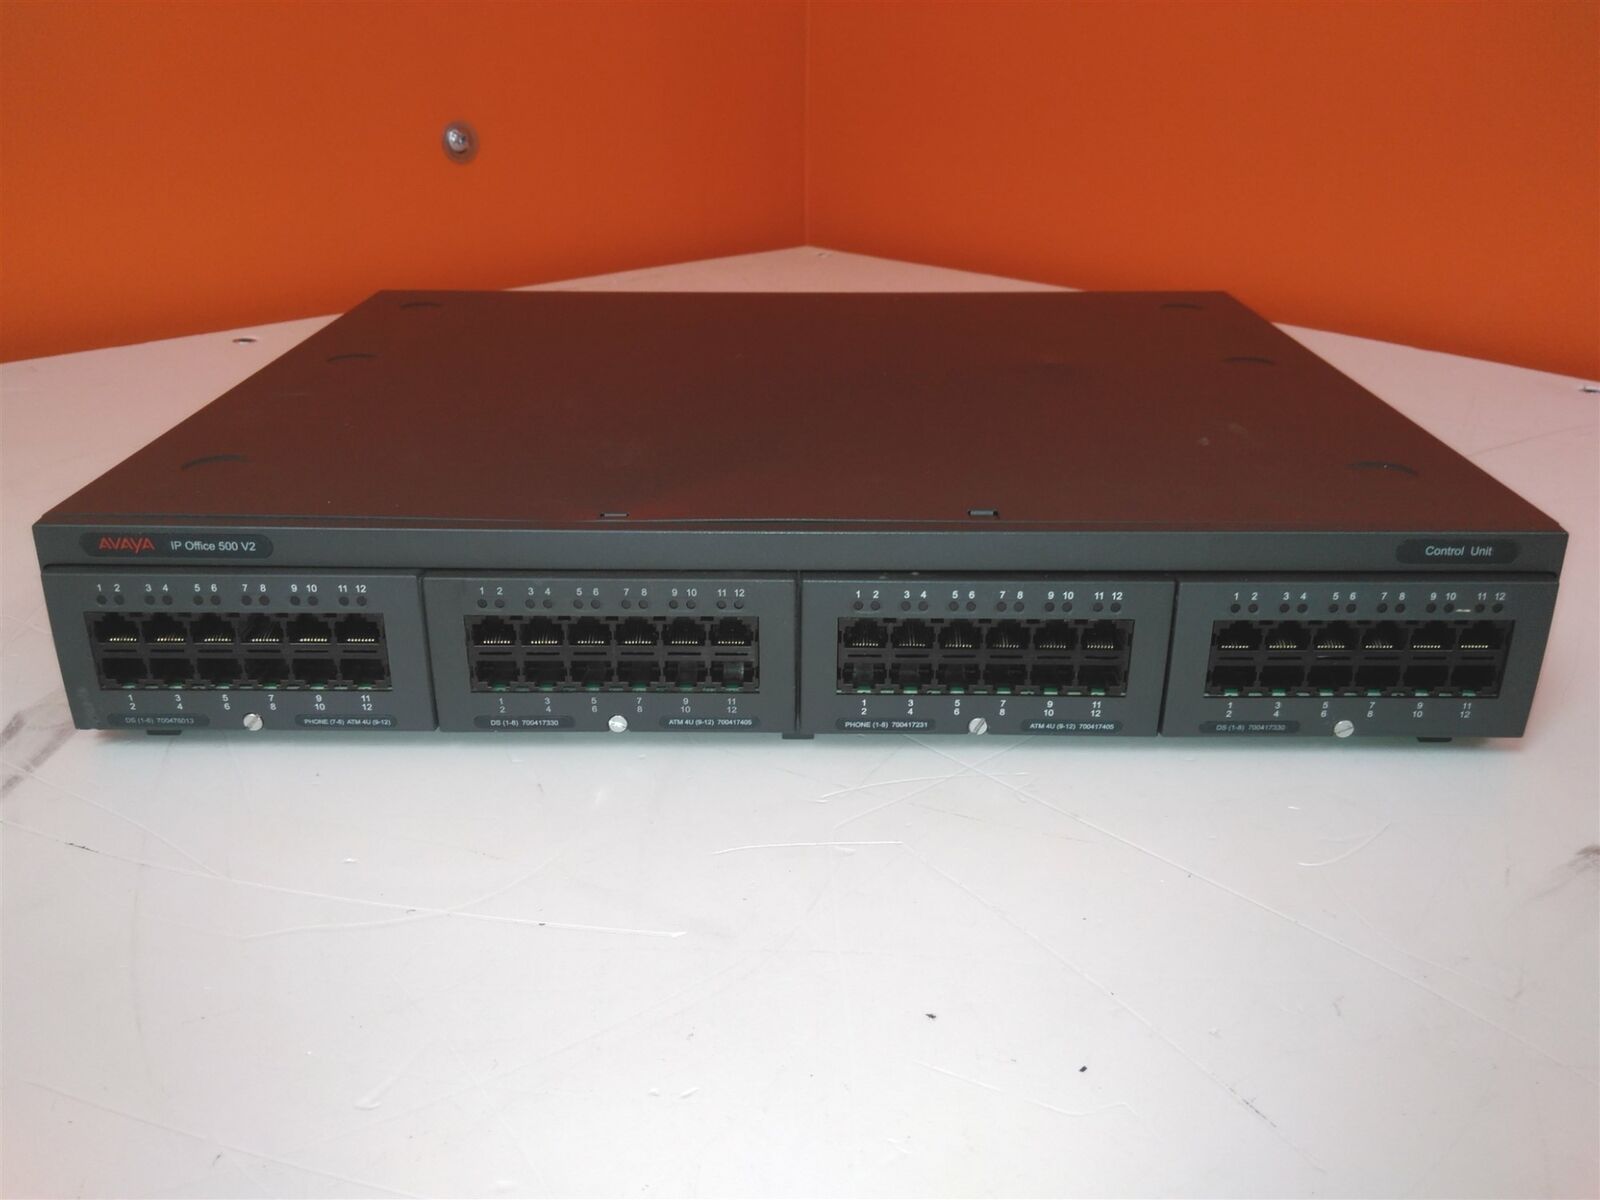 Defective Avaya IP Office 500 V2 700476005 Phone Control Unit with Modules AS-IS